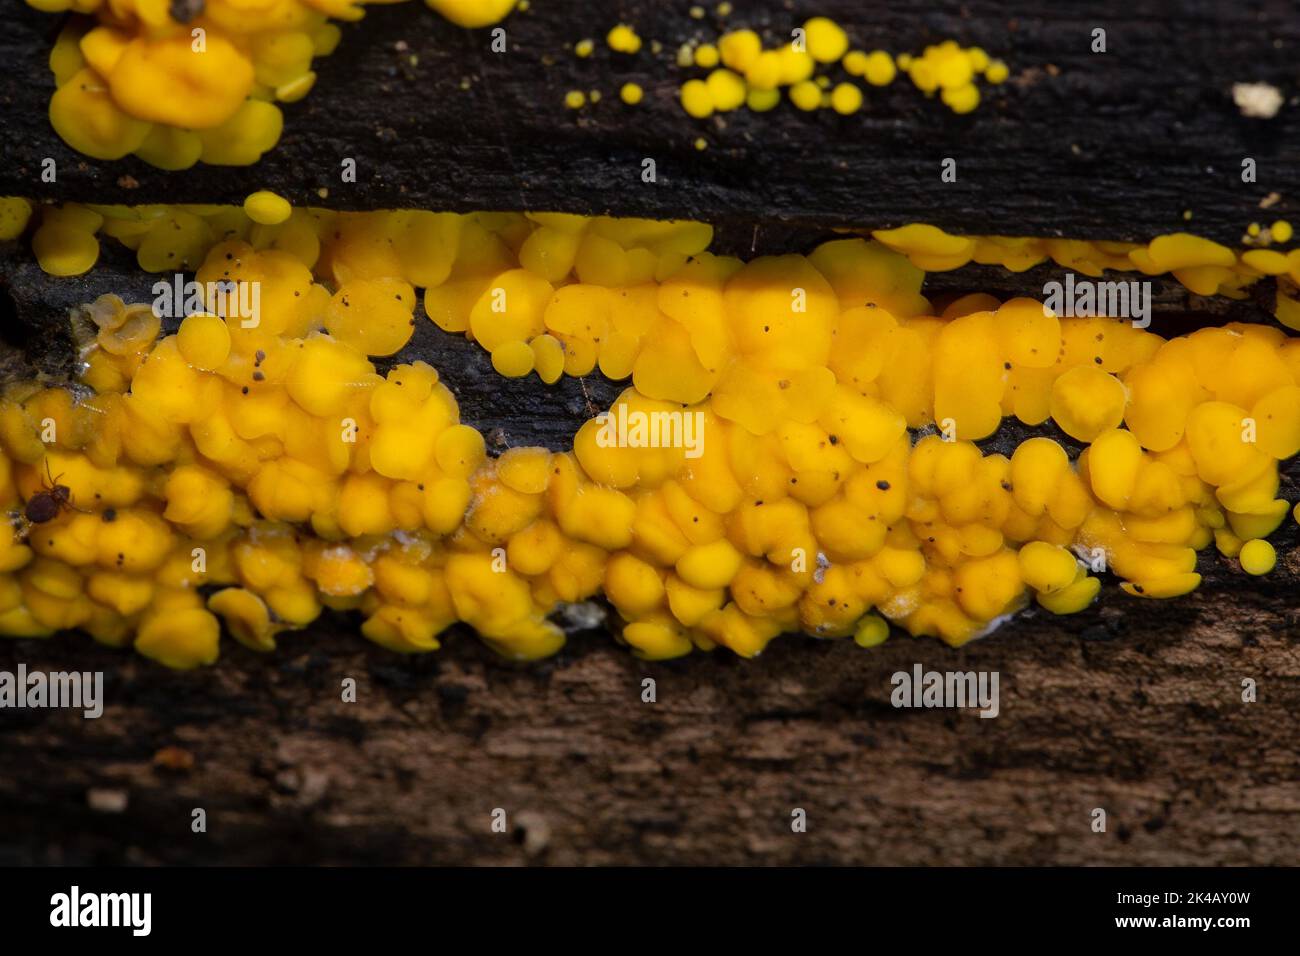 Lemon yellow brushwood cup many yellow fruit bodies next to each other on tree trunk Stock Photo